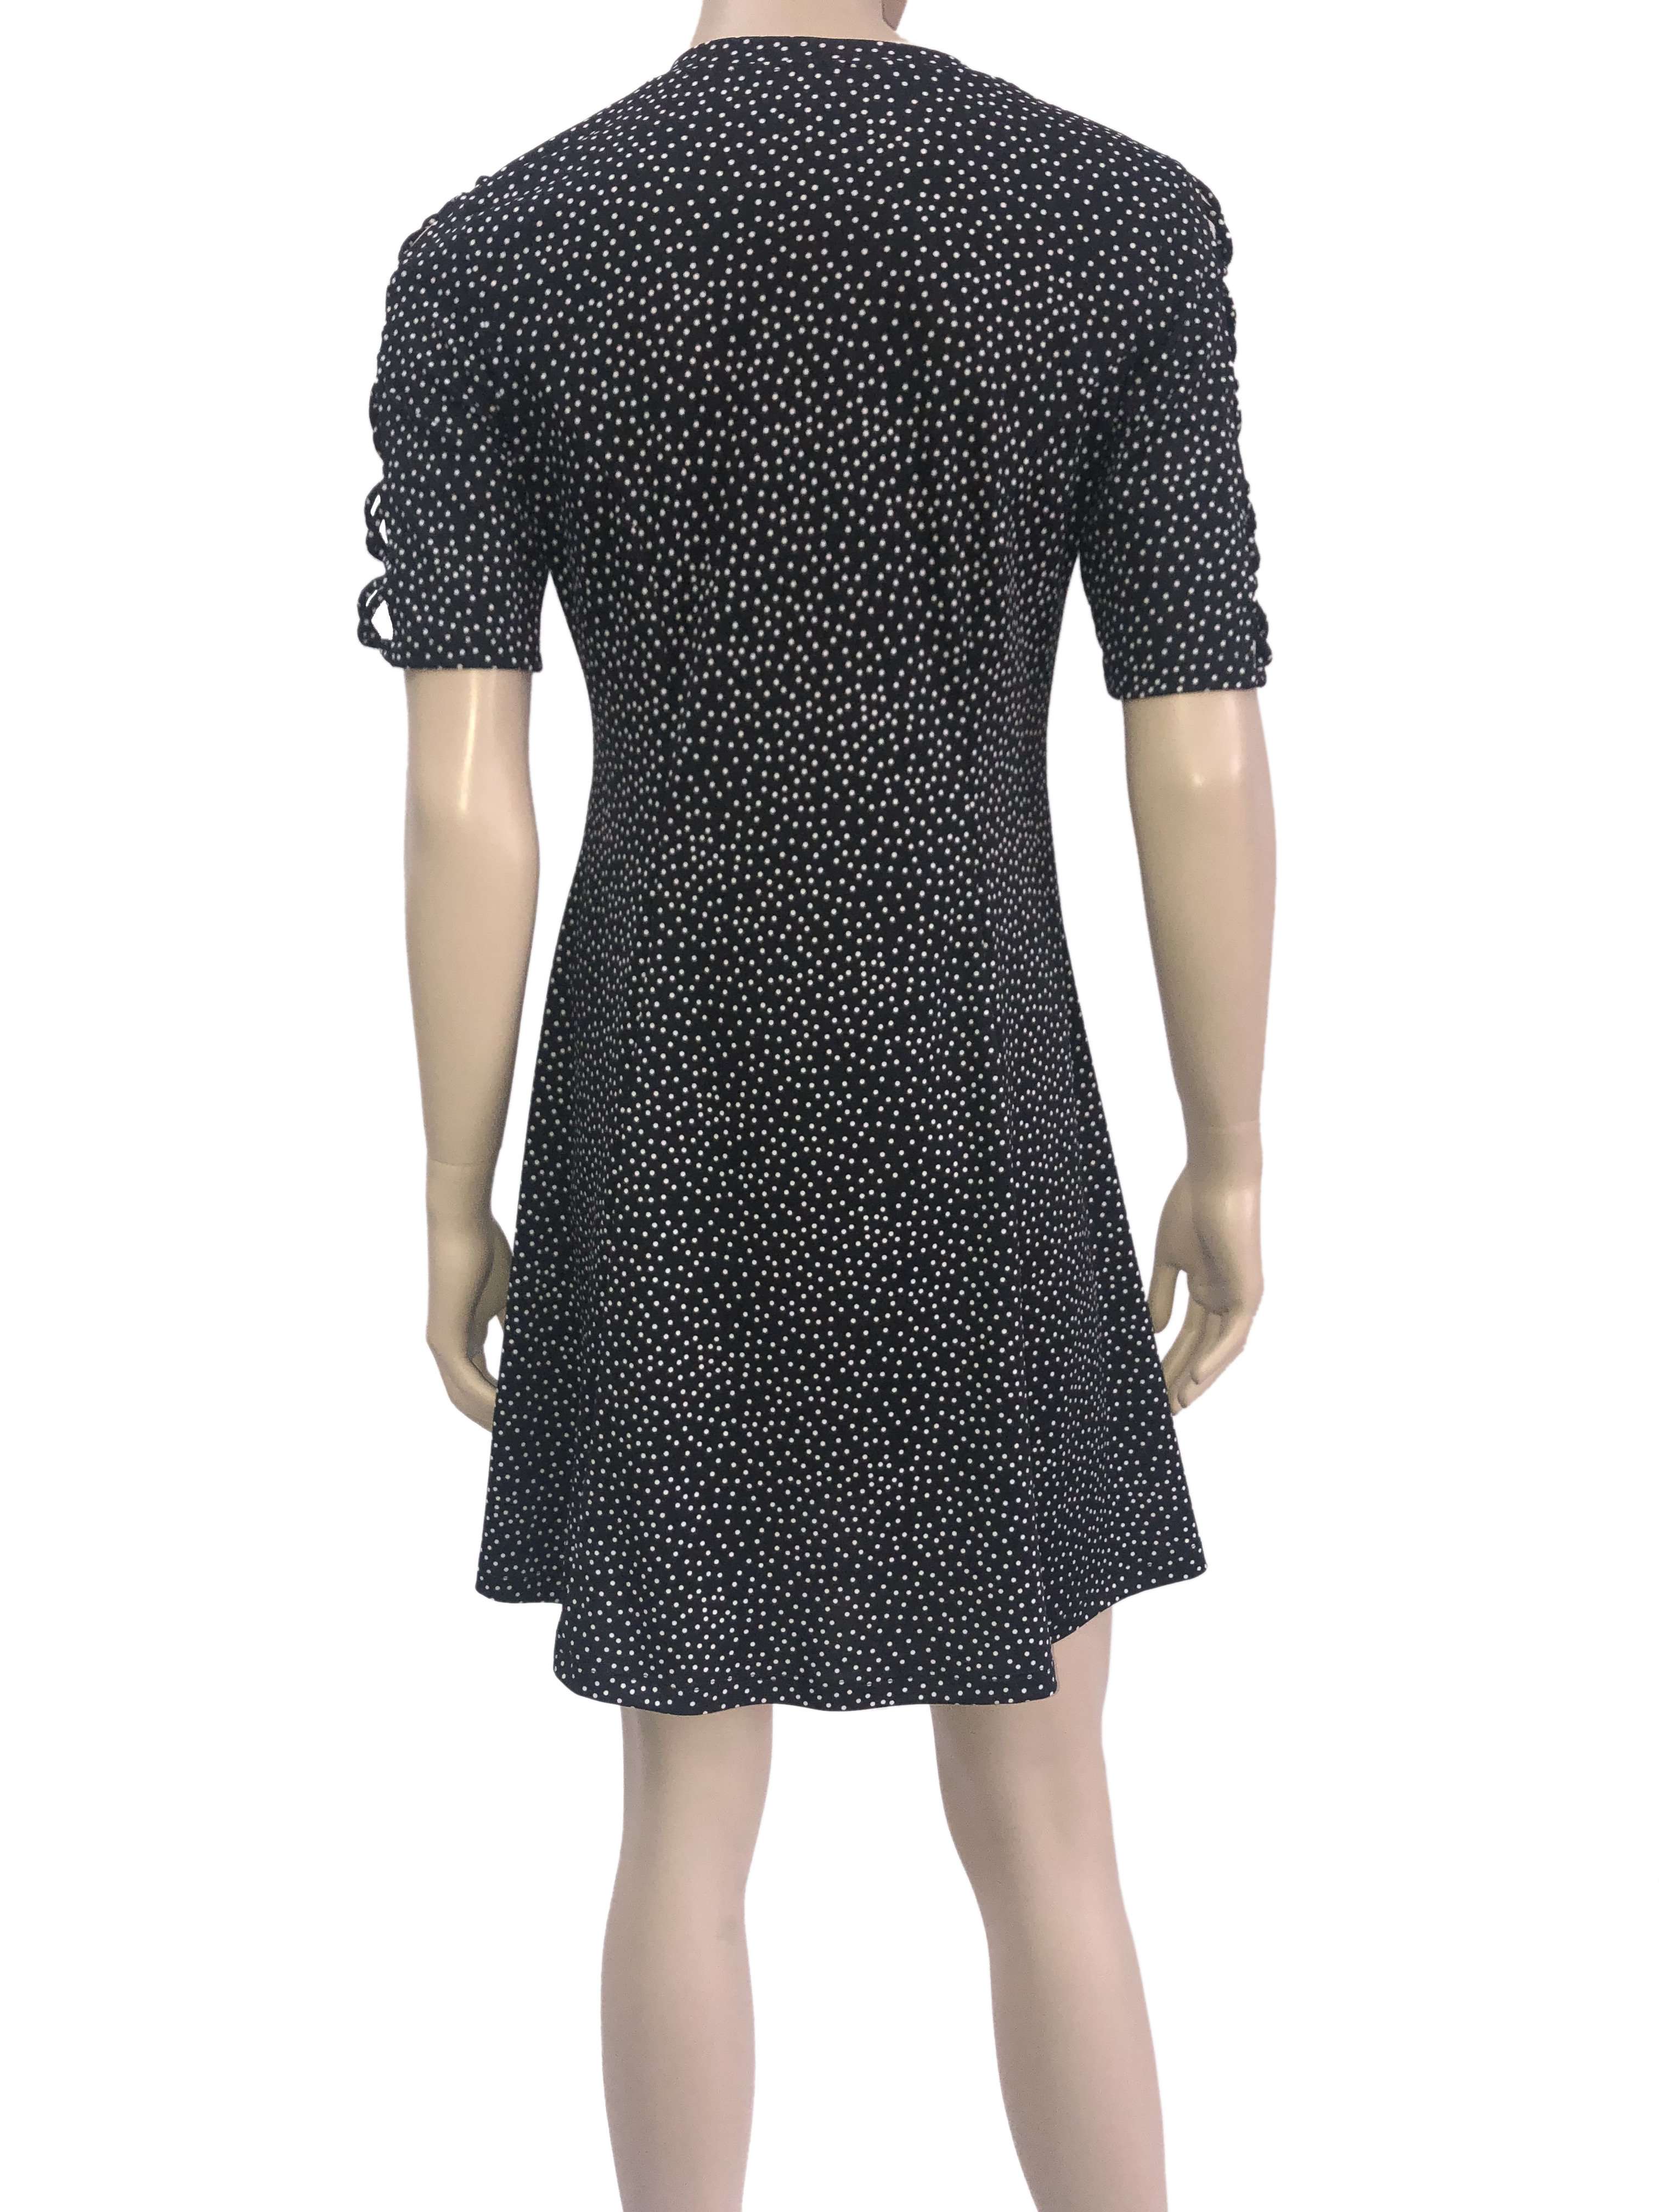 Women's Dresses on Sale Canada Flattering Fit Black Polka Dot Quality Stretch Fabric Made in Canada Yvonne Marie Boutiques - Yvonne Marie - Yvonne Marie